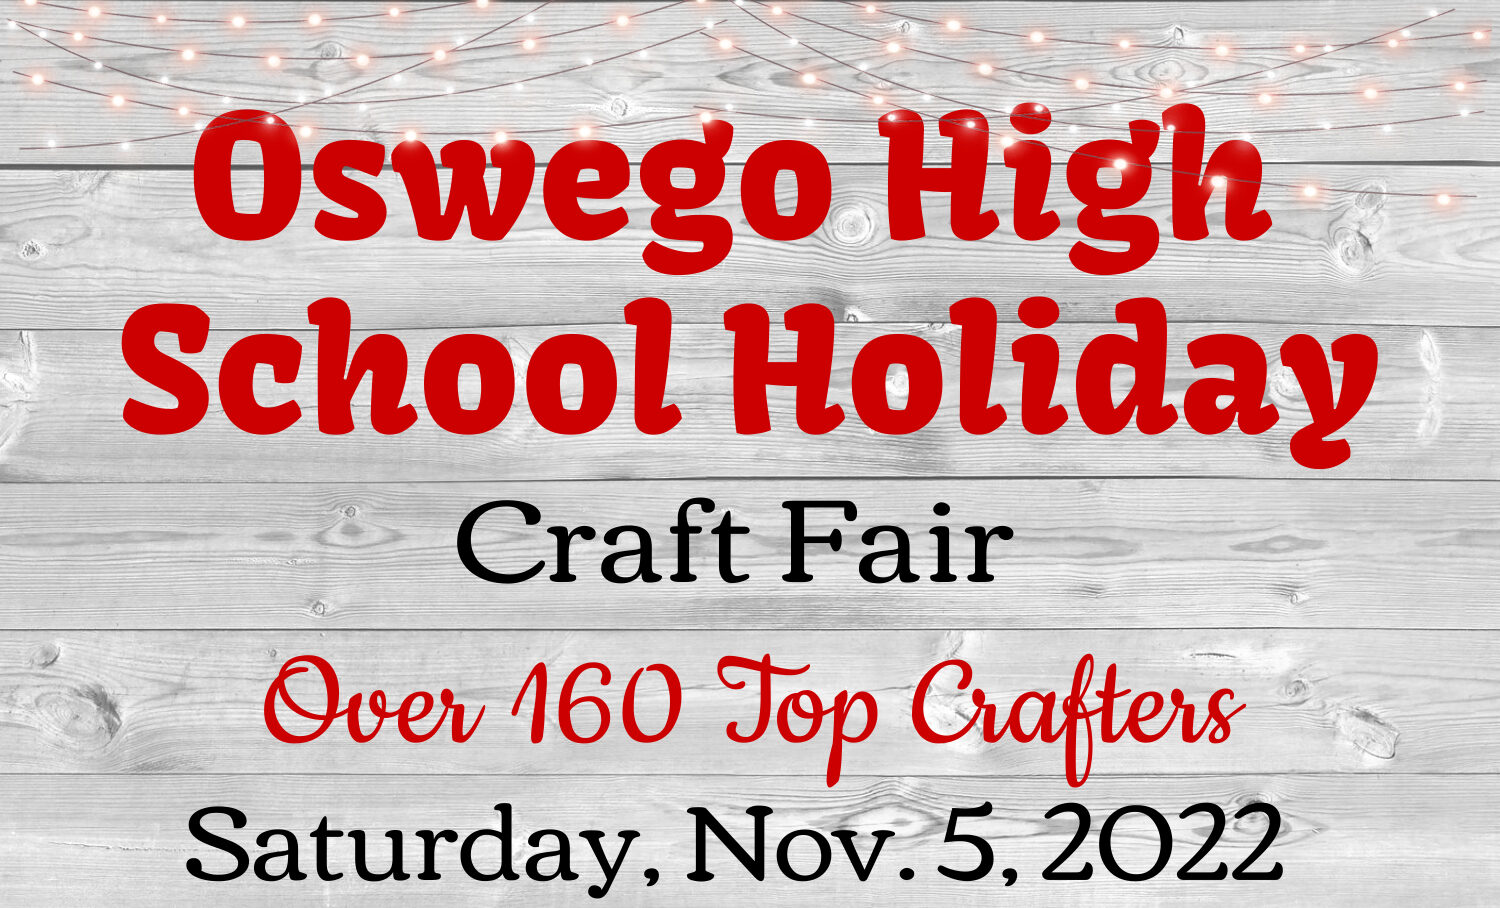 <h1 class="tribe-events-single-event-title">Oswego High School Holiday Craft Fair</h1>